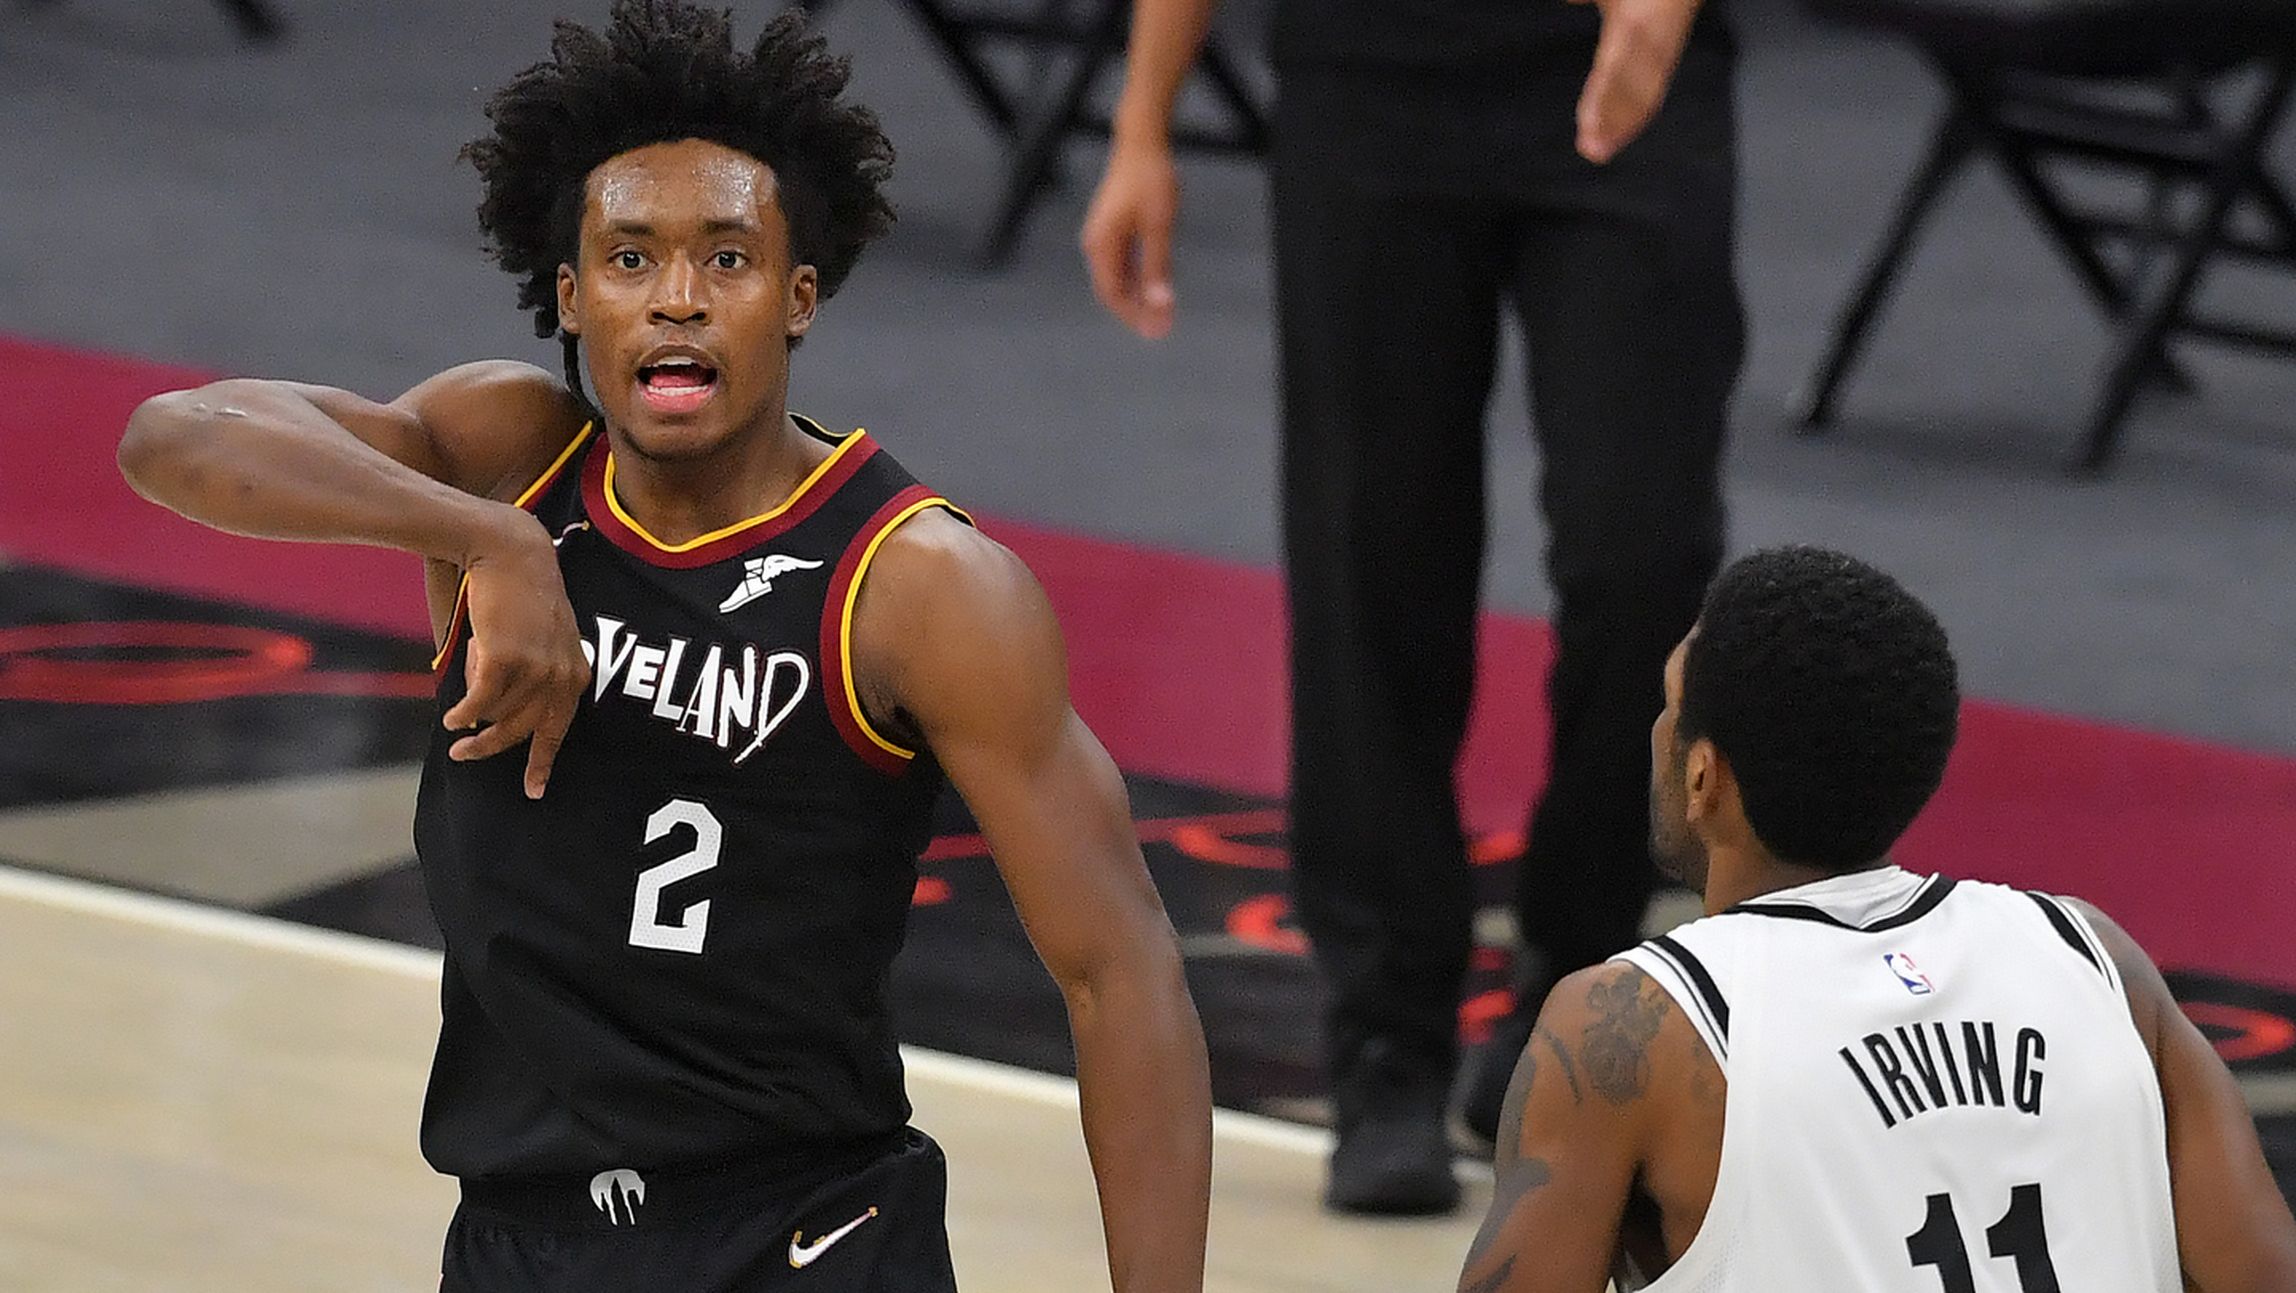 Kyrie Irving of the Brooklyn Nets watches as Collin Sexton of the Cleveland Cavaliers celebrates.